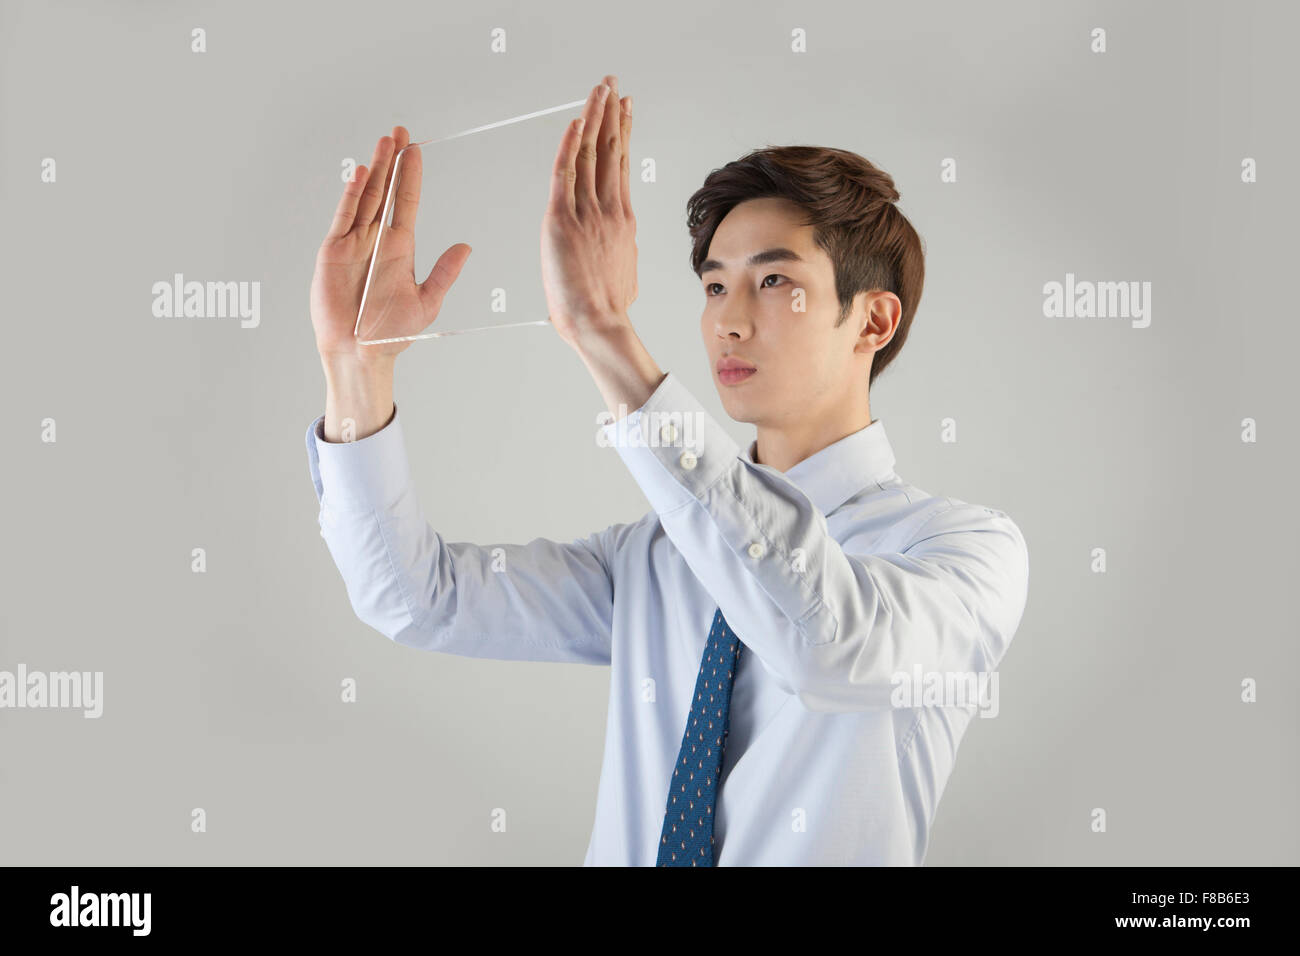 Businessman holding touch screen up high close to his face Stock Photo